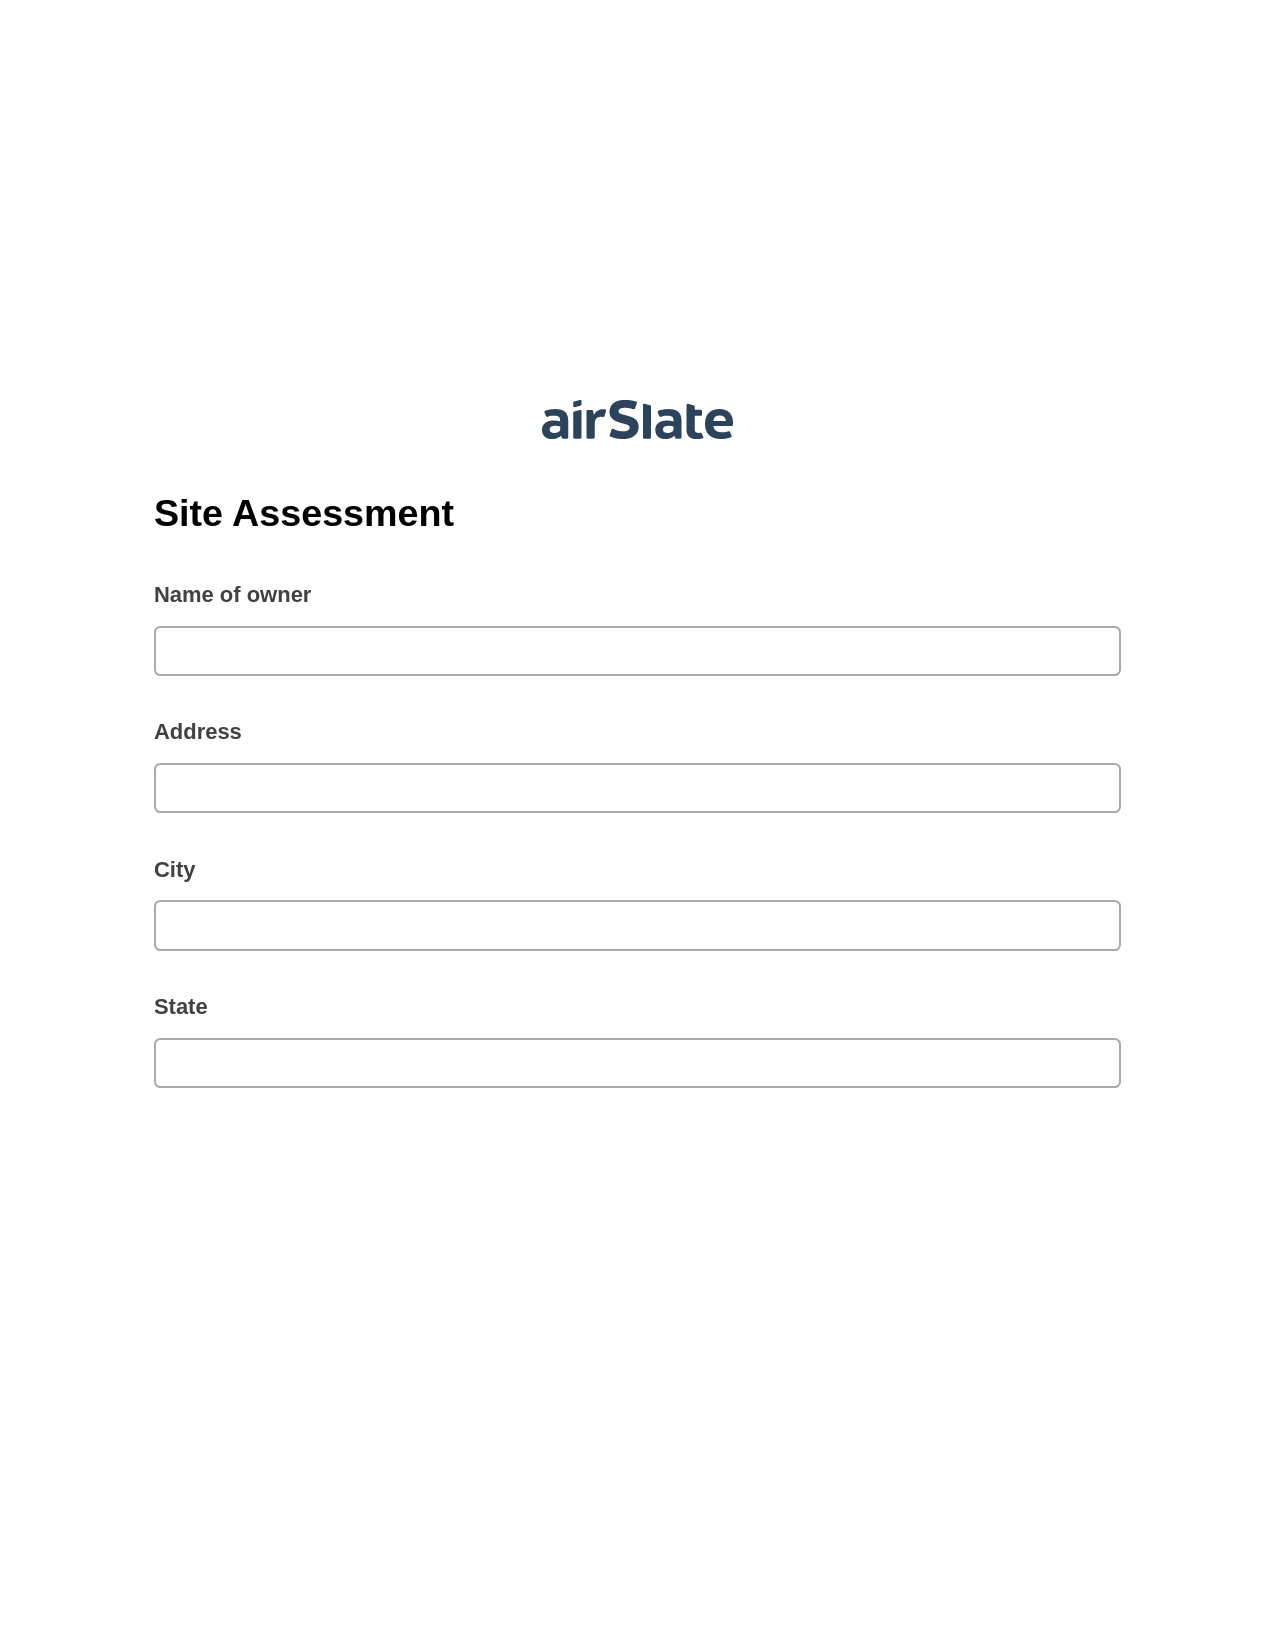 Site Assessment Pre-fill from Excel Spreadsheet Dropdown Options Bot, Google Cloud Print Bot, Archive to SharePoint Folder Bot